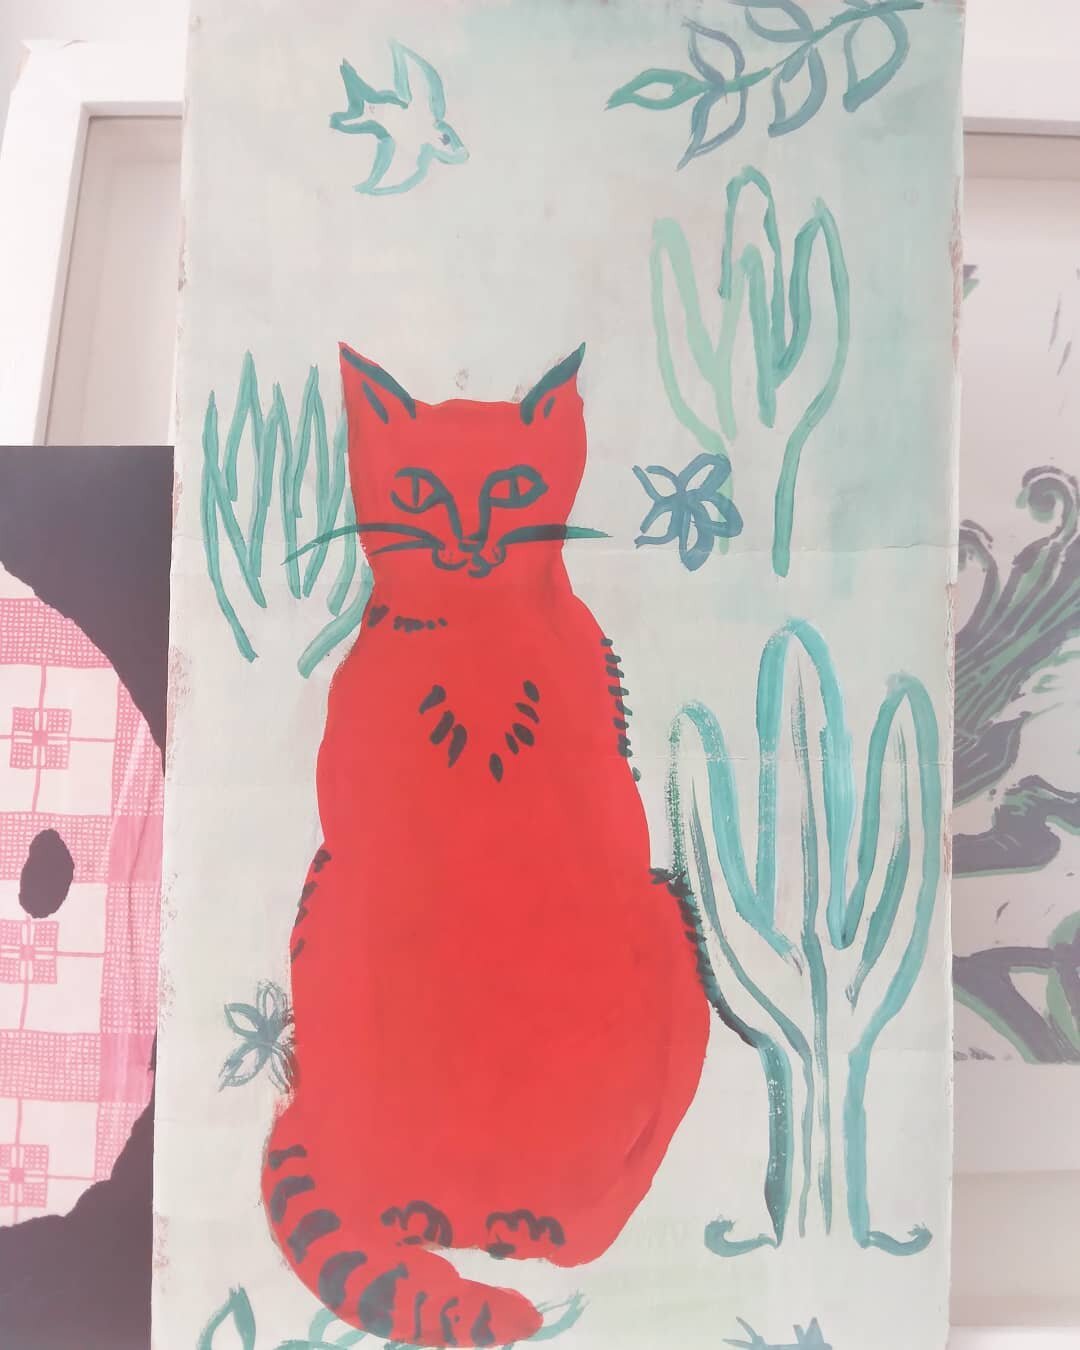 This handsome pimento Mexican cat painted by my lovely pal @mimia29 arrived in the post today. What a lovely surprise! Can't beat a bit of post, especially when it's as beautiful as this.